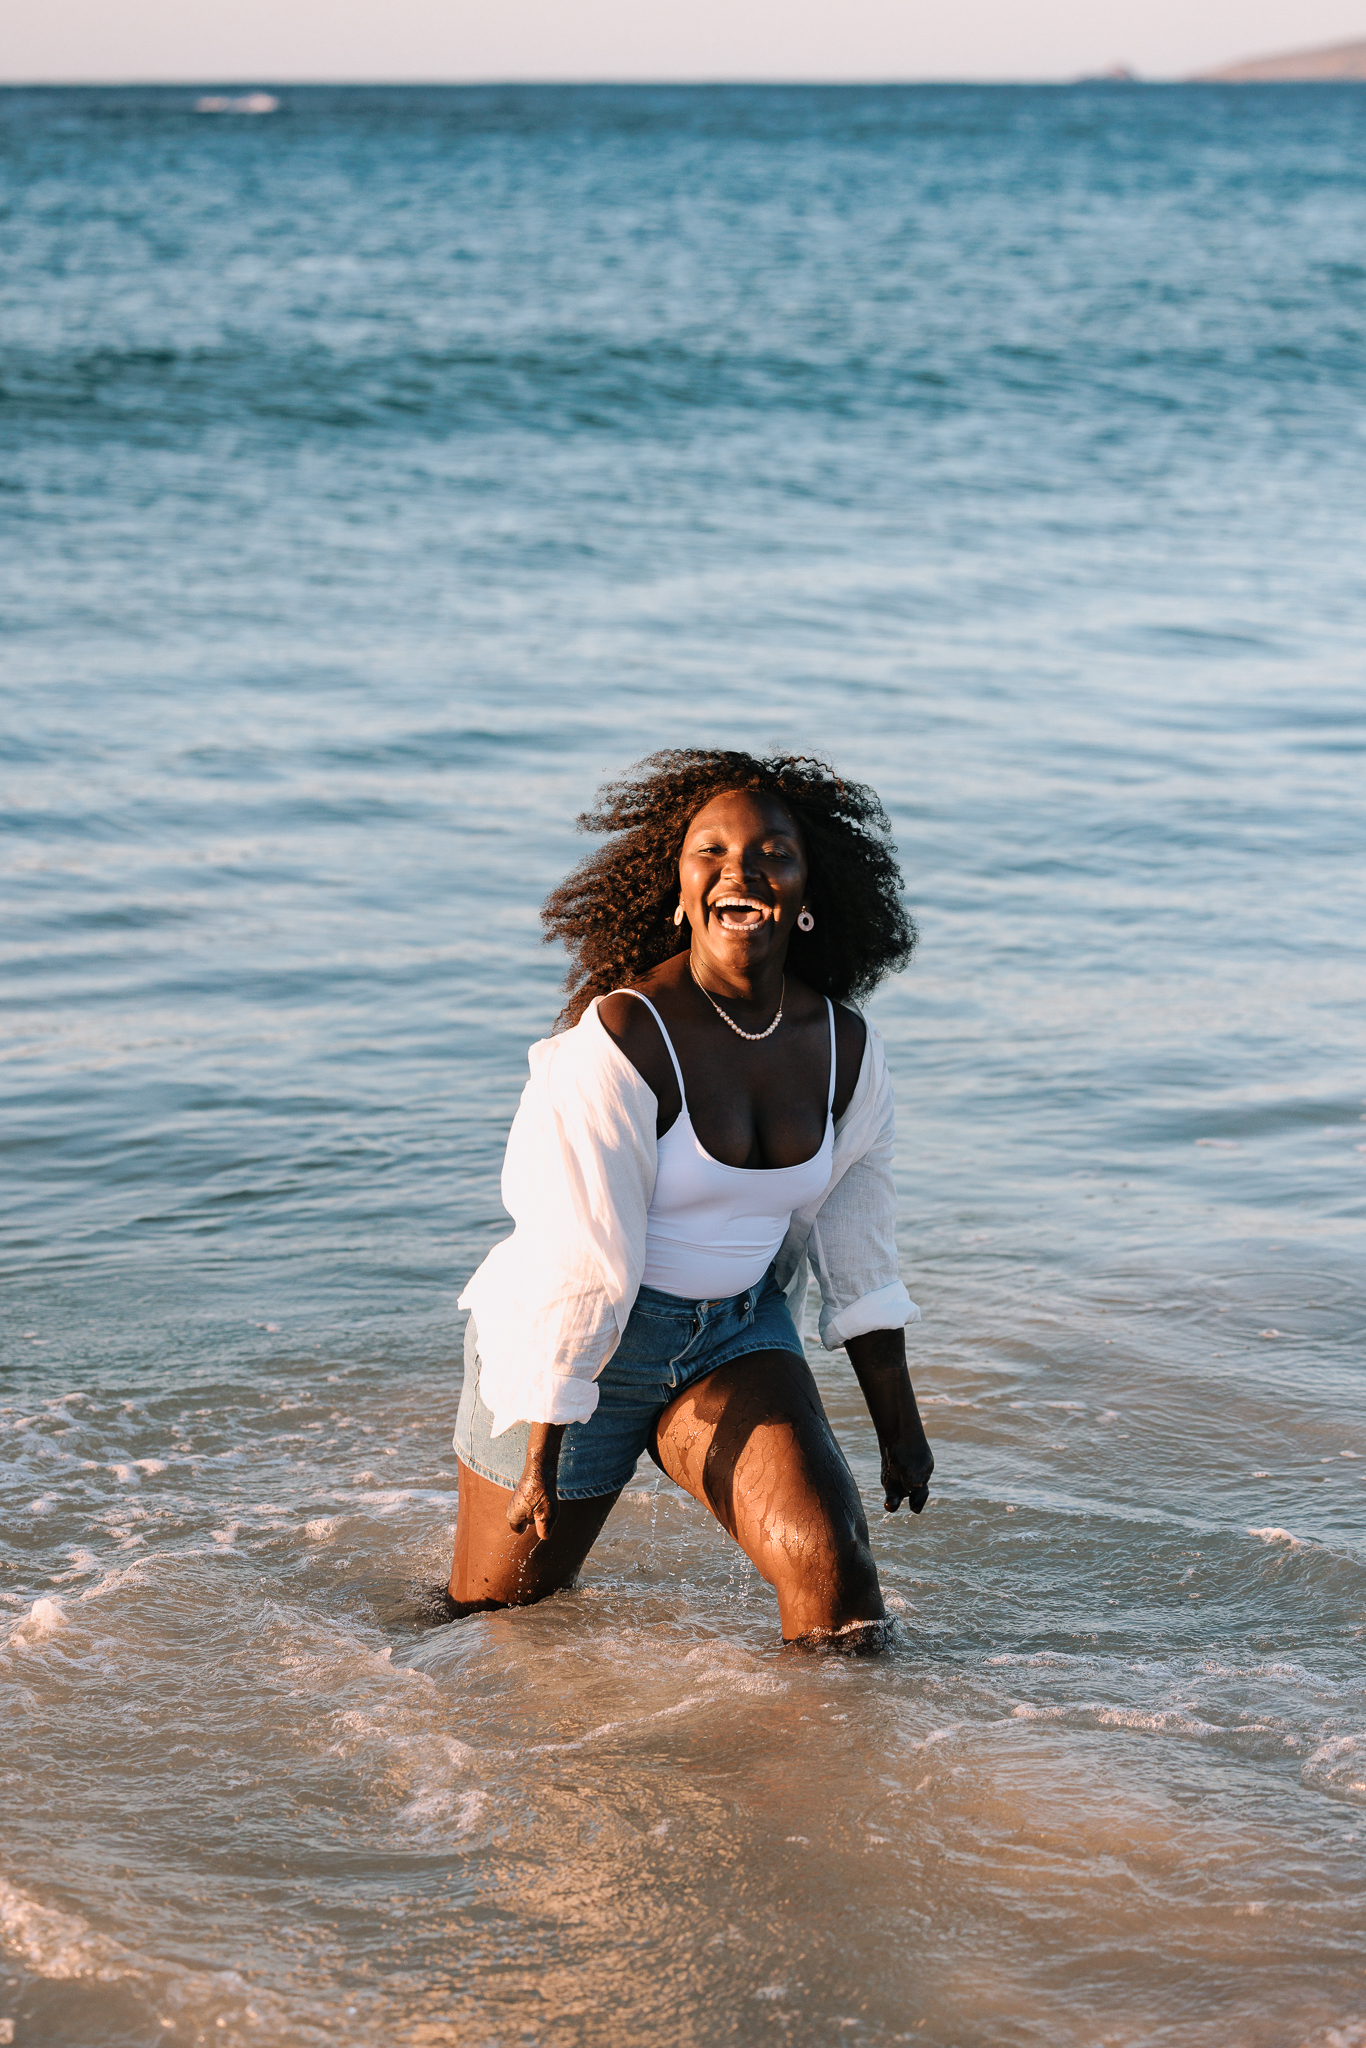 From South Sudan and the Kakuma refugee camp, Esther Onek made her way to Australia, where she is social worker and a people’s rights advocate. She’s seen here playing on the beach. (Photo Credit: Jarrad Seng / Celebrity Cruises / AIPP)